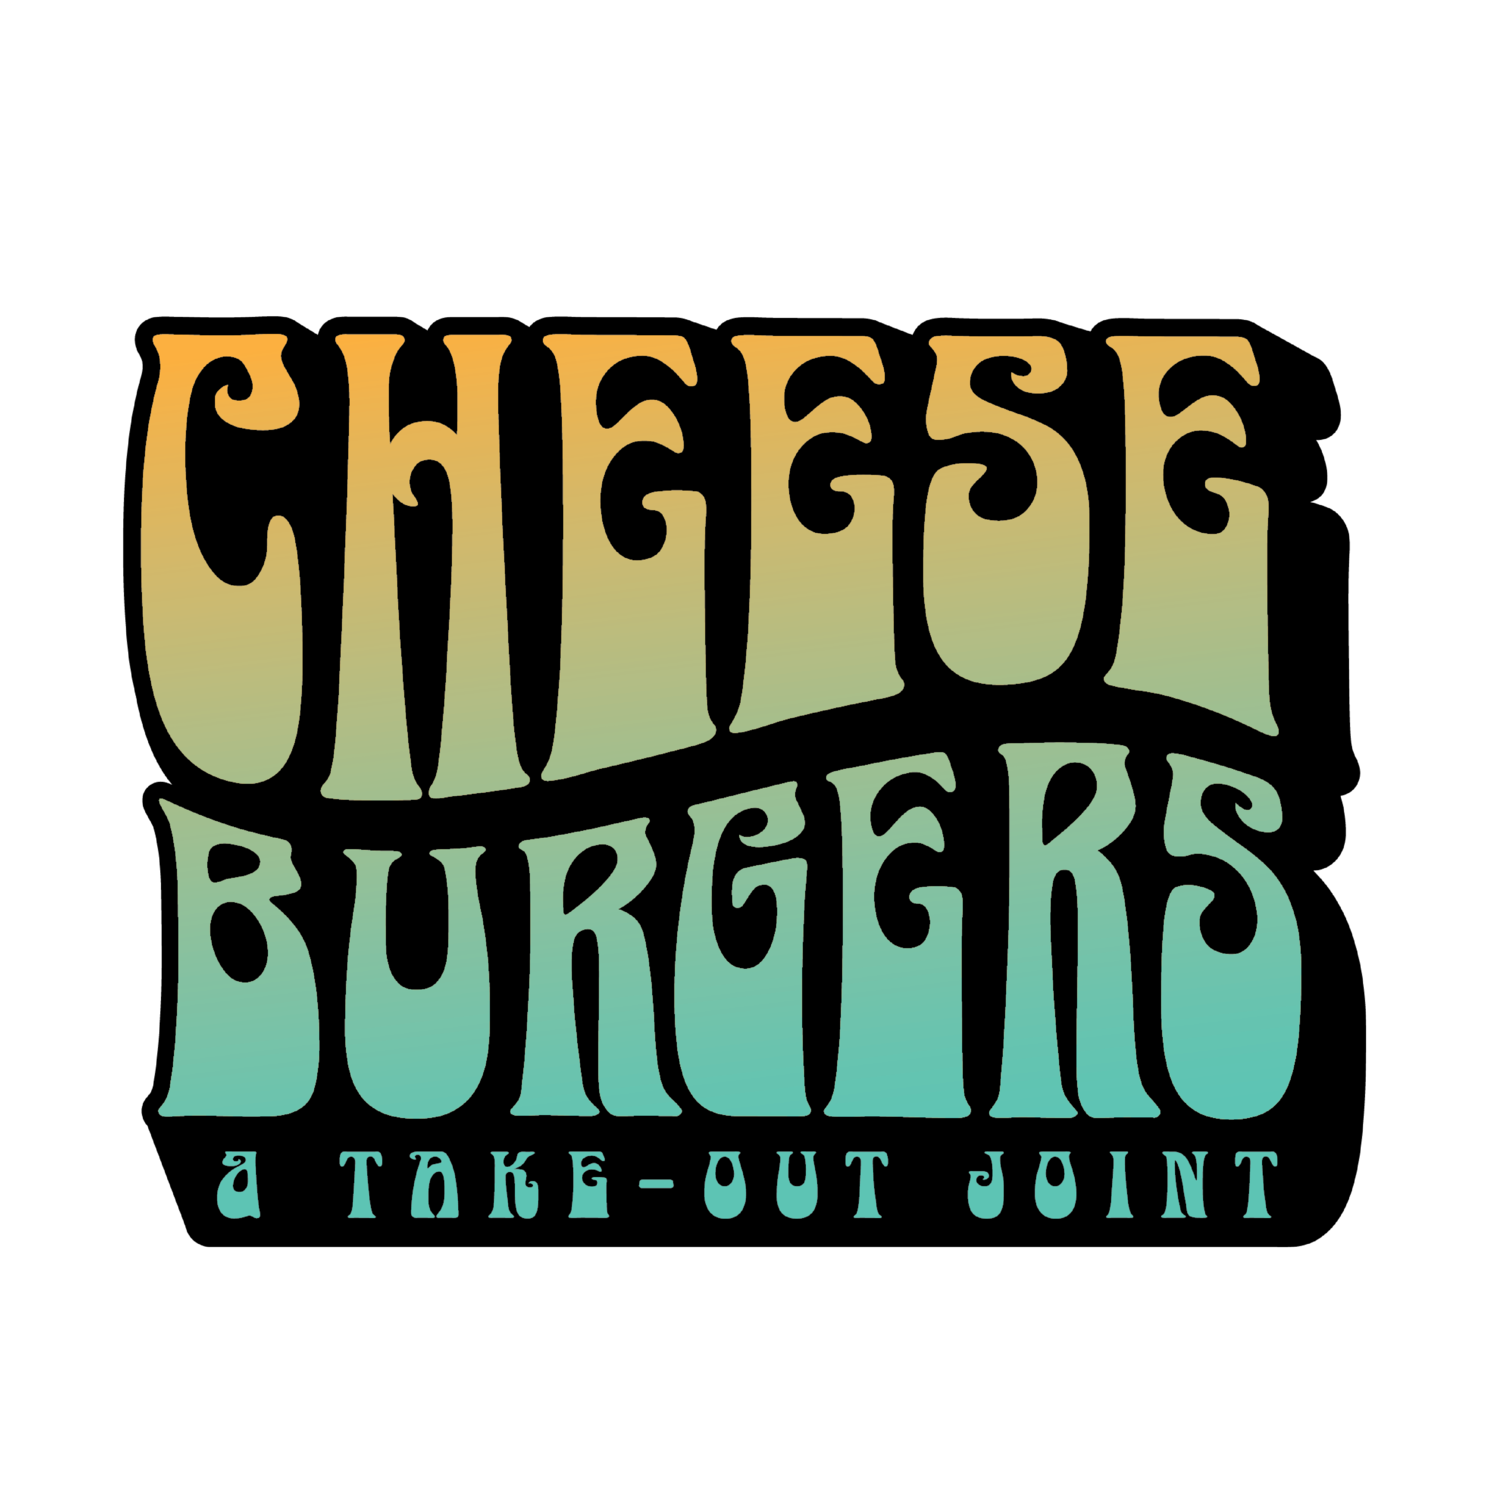 Cheeseburgers - A Takeout Joint